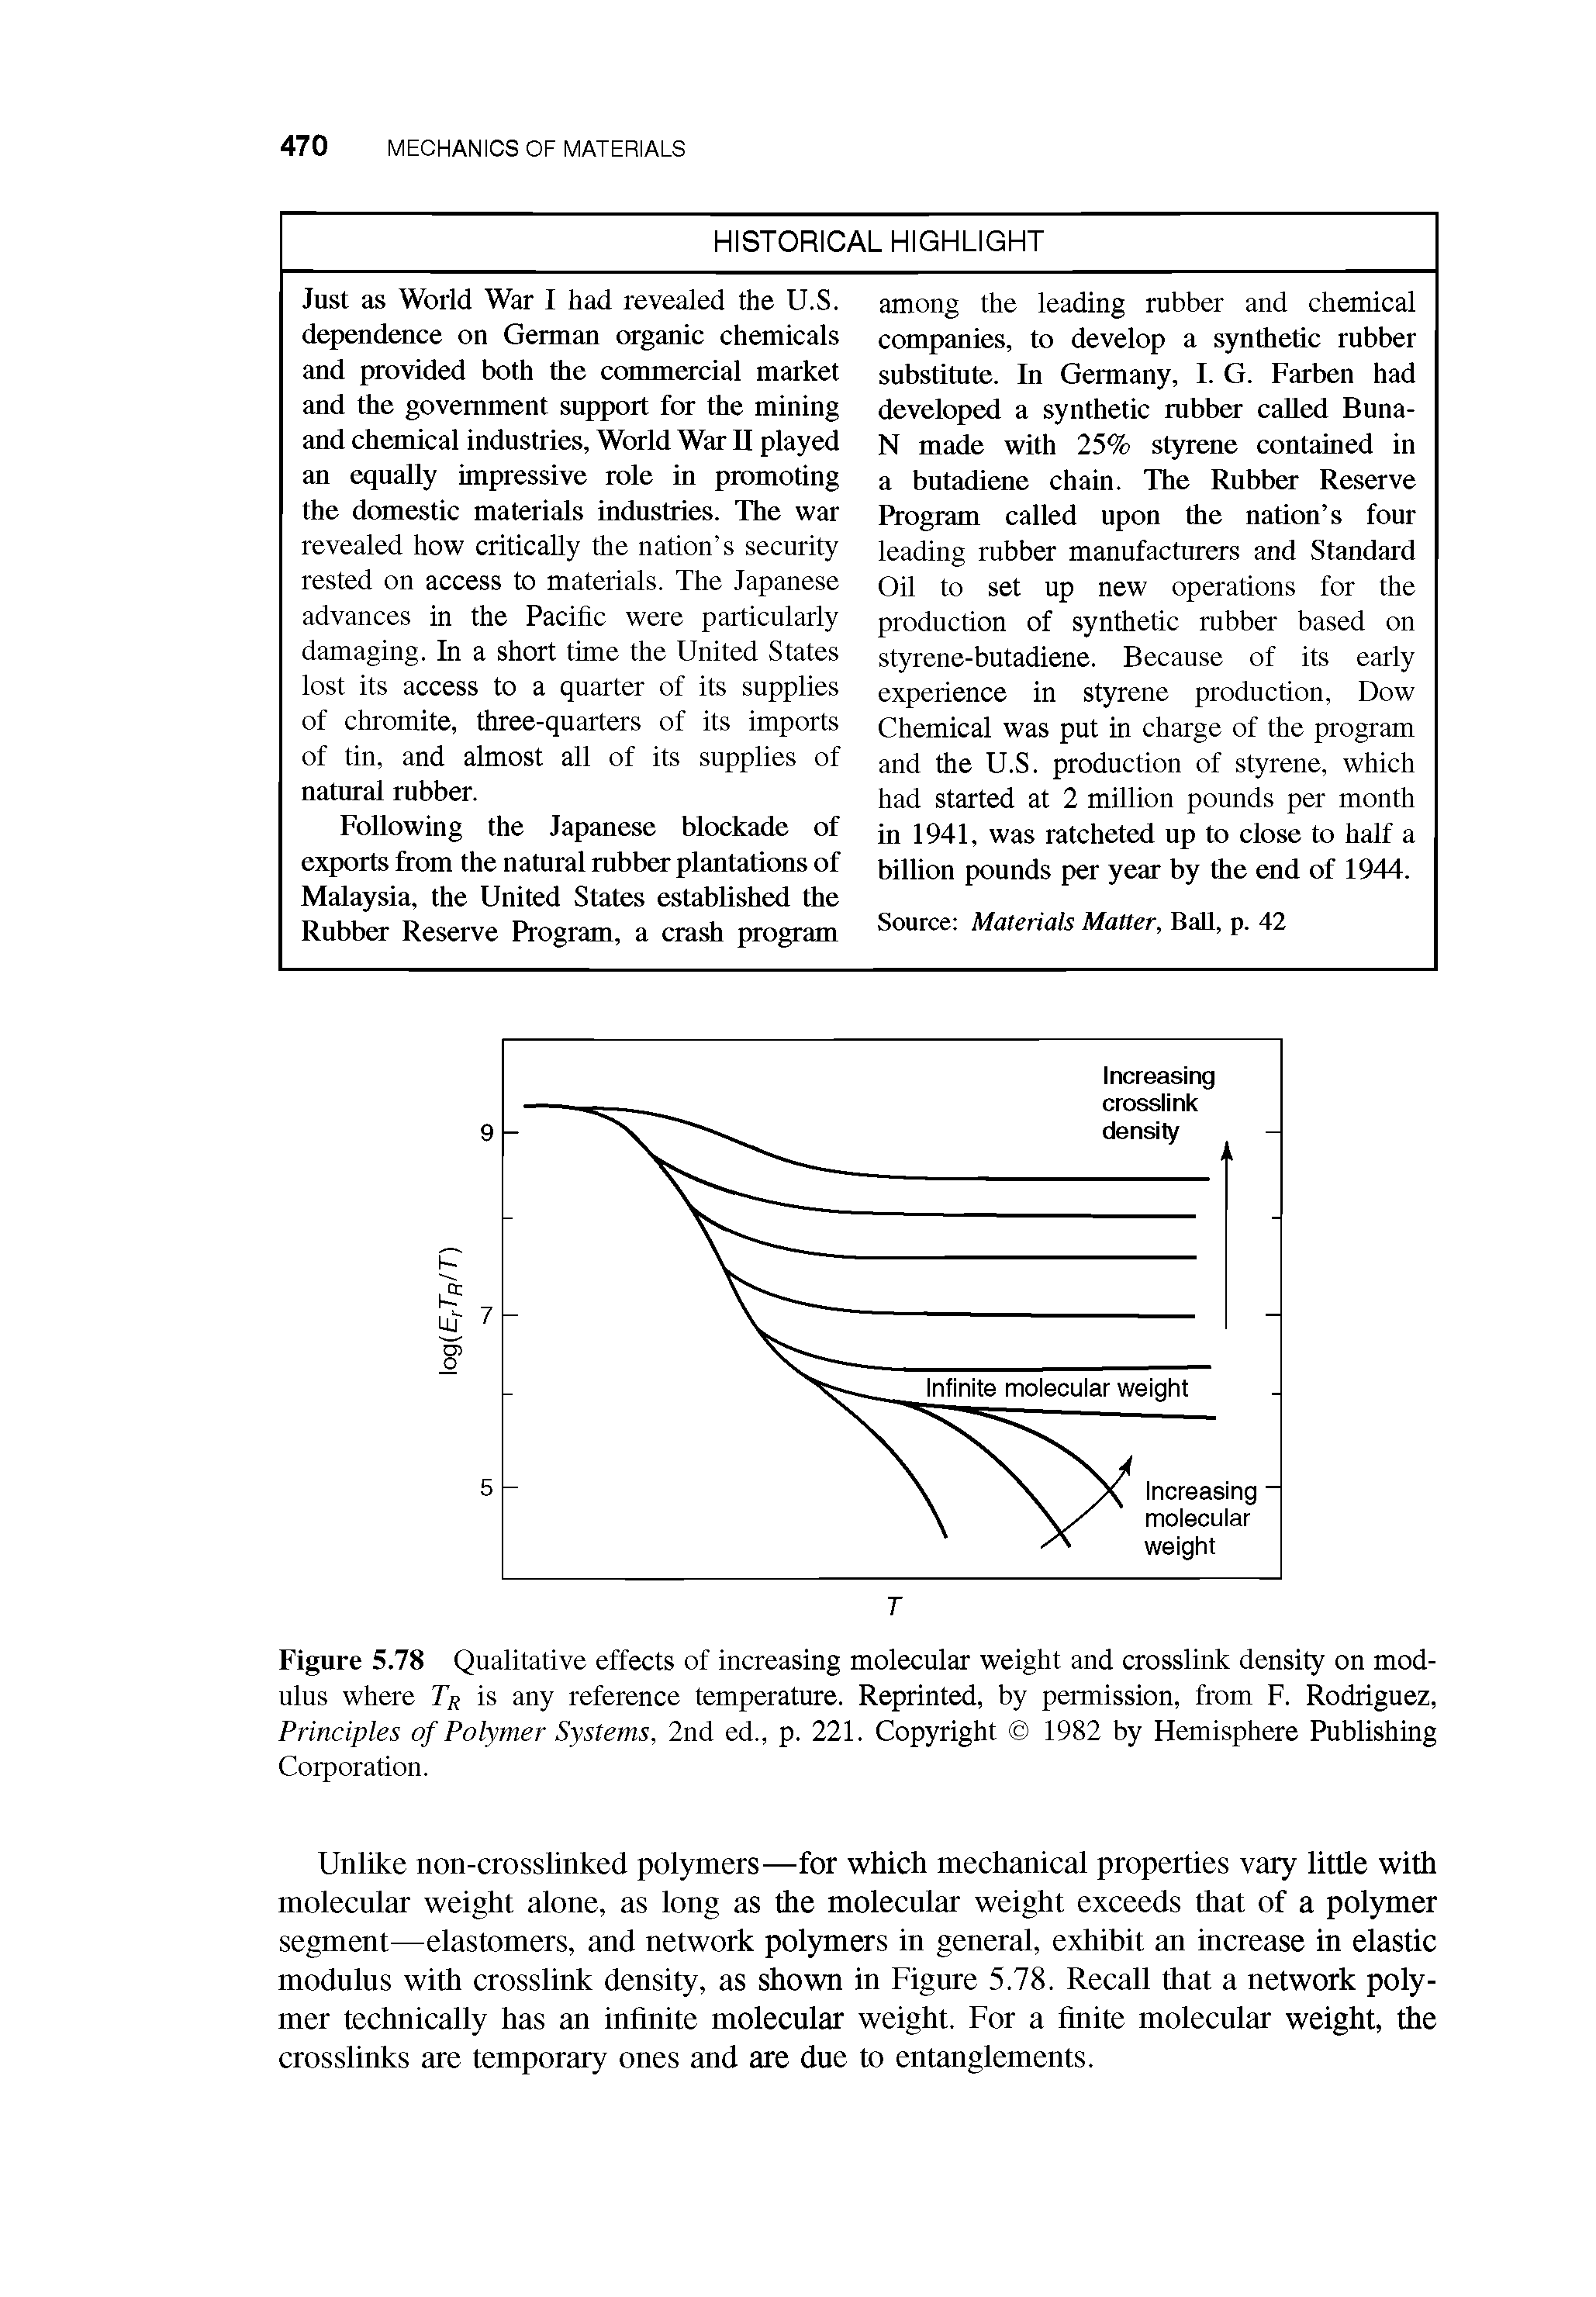 Figure 5.78 Qualitative effects of increasing molecular weight and crosslink density on modulus where is any reference temperature. Reprinted, by permission, from F. Rodriguez, Principles of Polymer Systems, 2nd ed., p. 221. Copyright 1982 by Hemisphere Publishing Corporation.